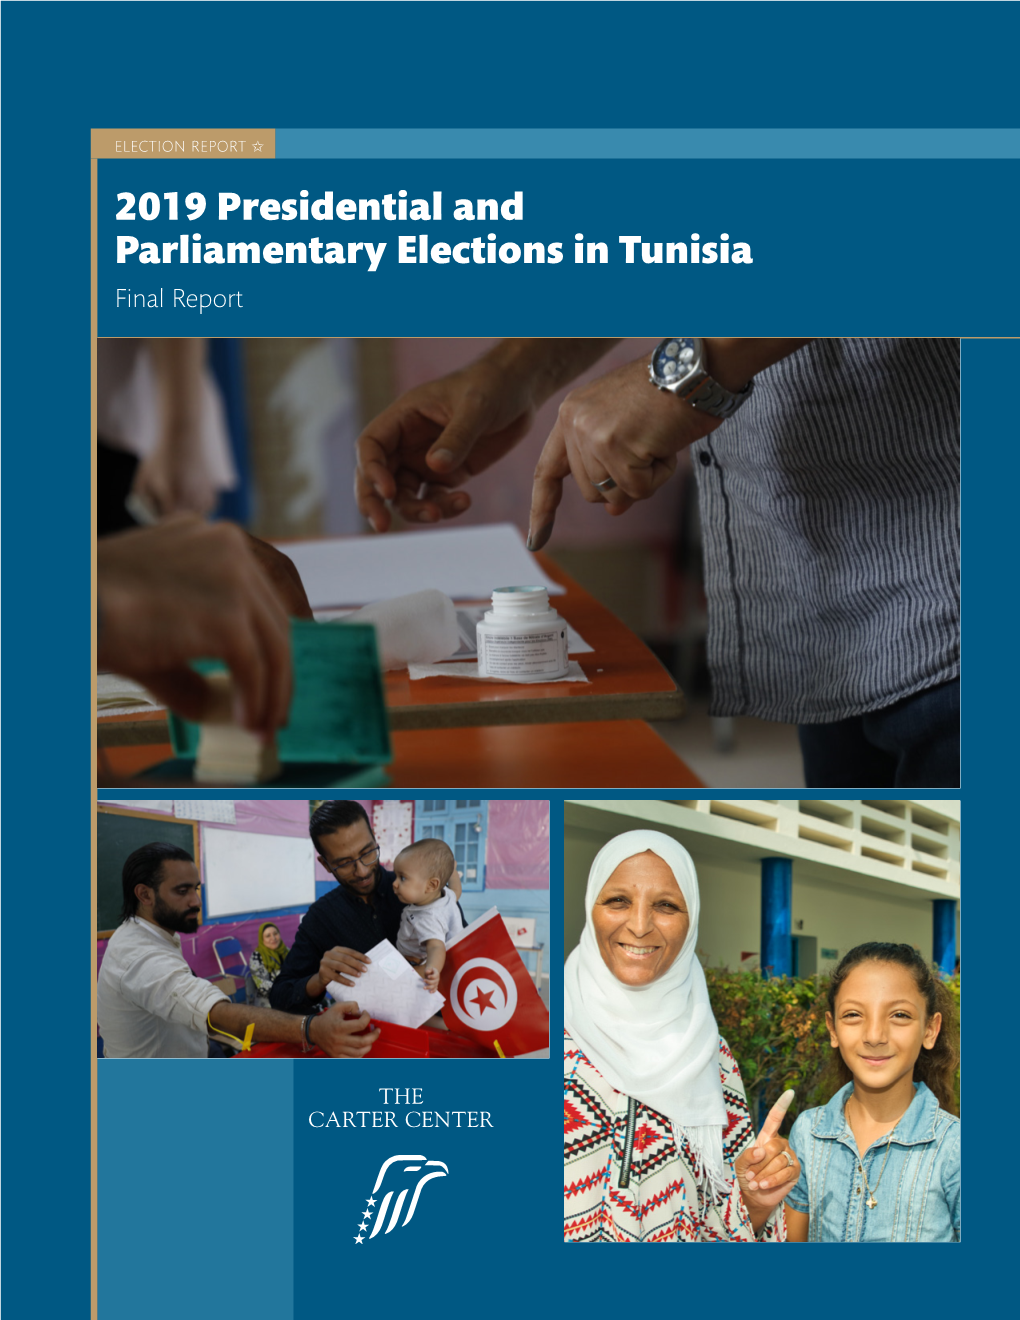 2019 Presidential and Parliamentary Elections in Tunisia Final Report